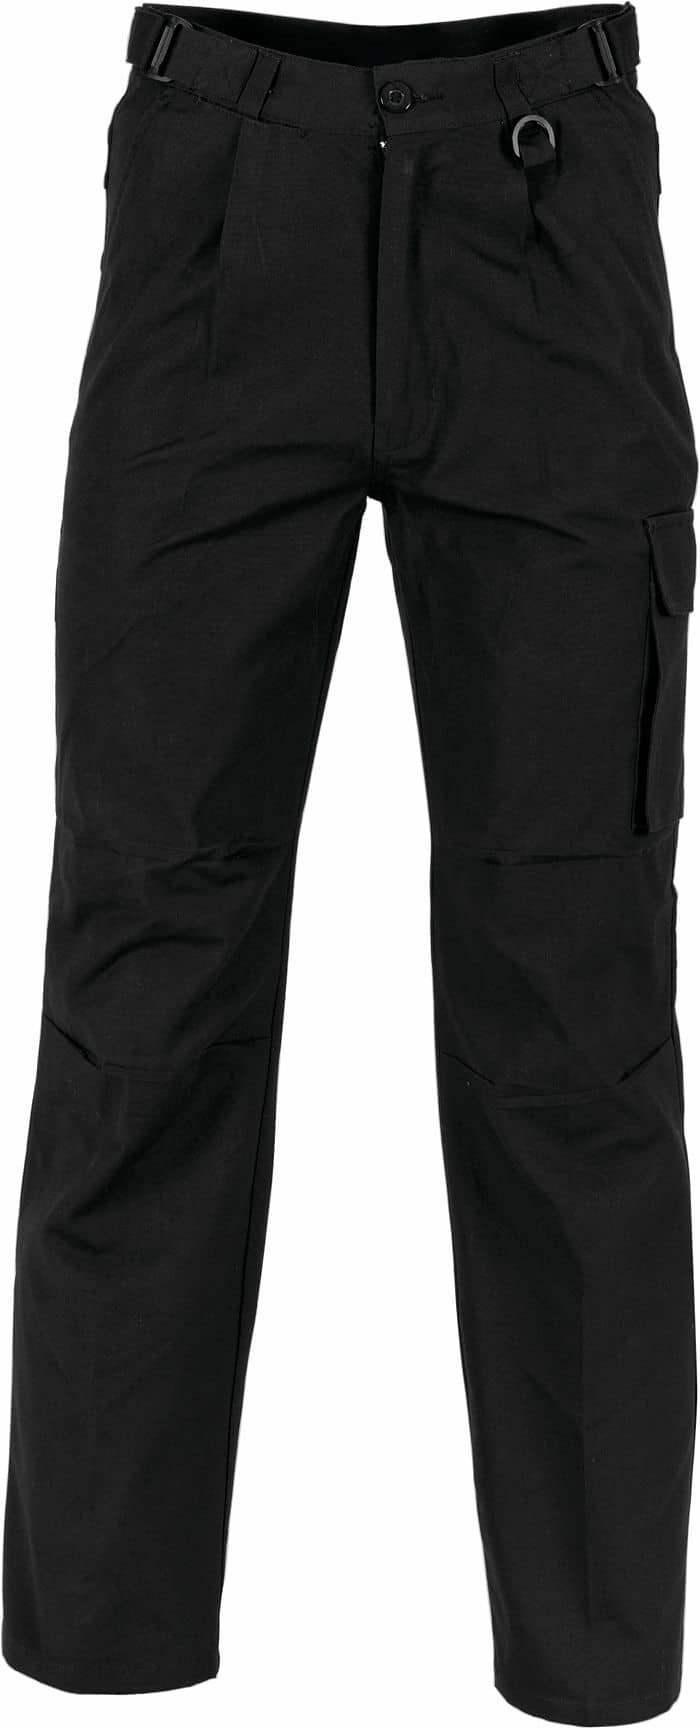 Wrangler Riggs Men's Workwear 100% Cotton Ripstop Relaxed Fit Cargo Pants  3W060 - Đức An Phát